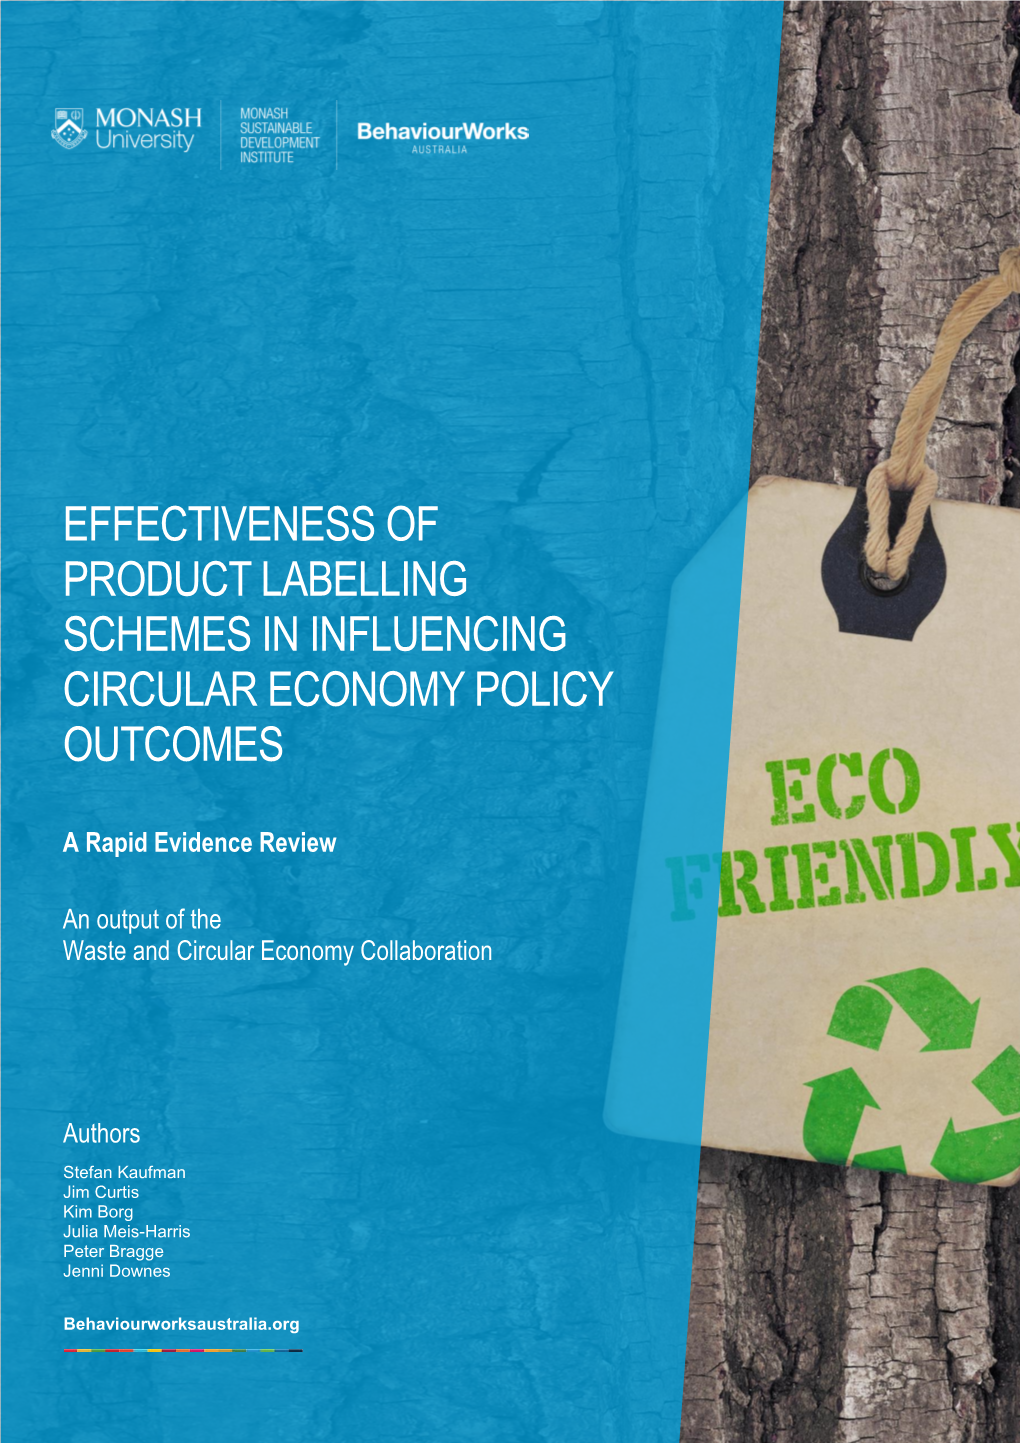 Effectiveness of Product Labelling Schemes in Influencing Circular Economy Policy Outcomes